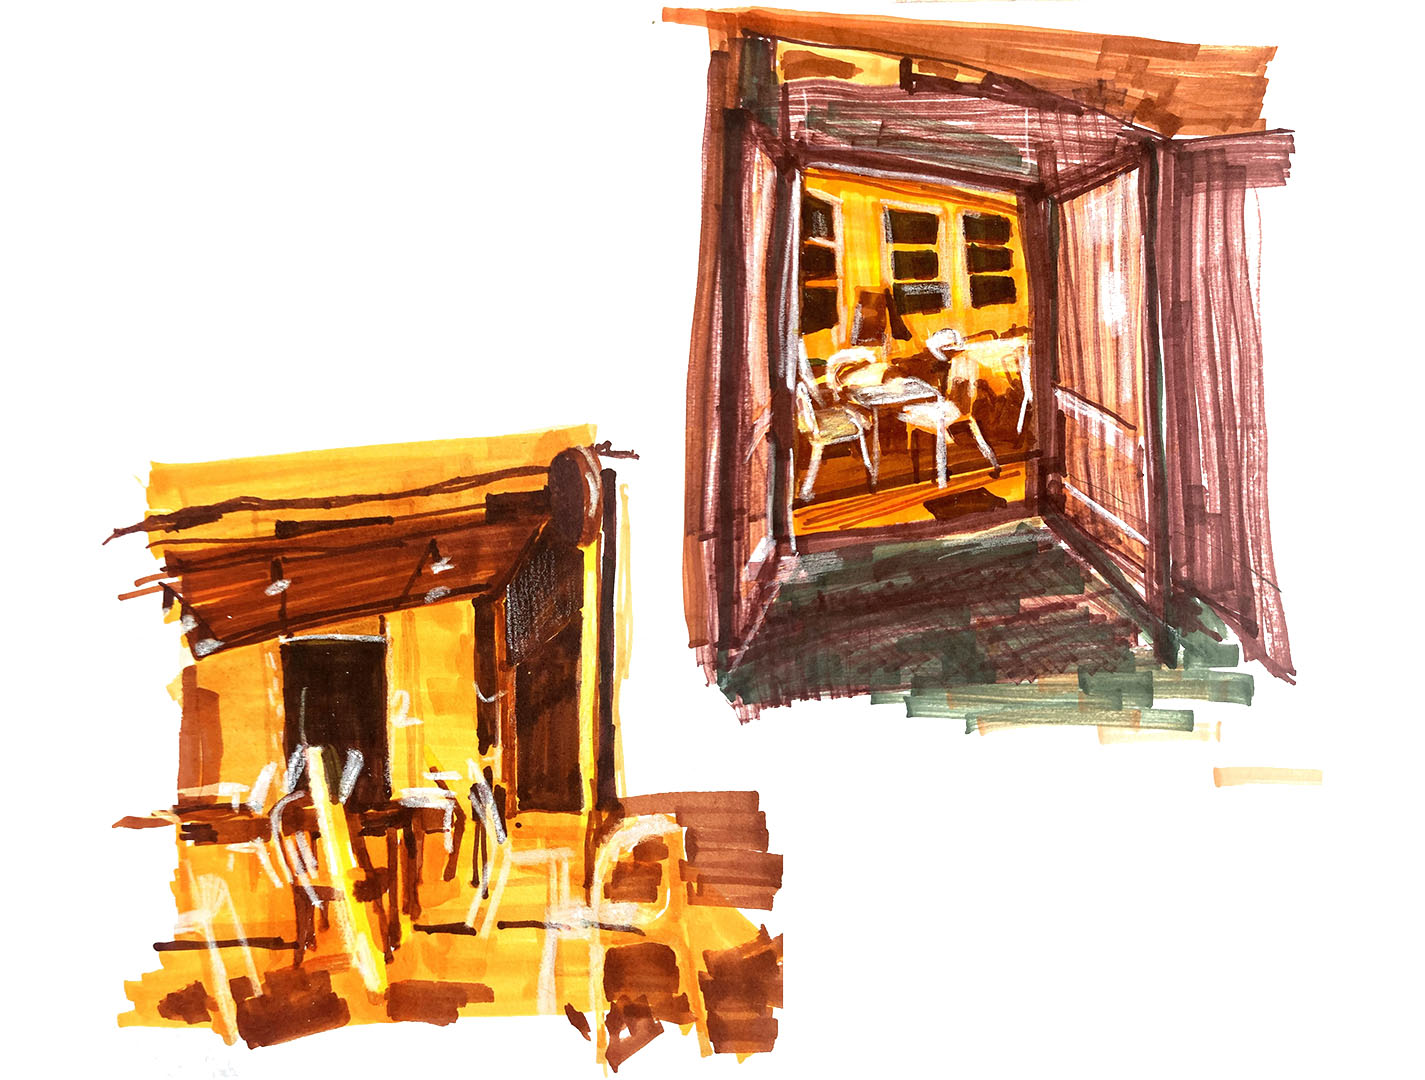 Two illustrations of empty cafe